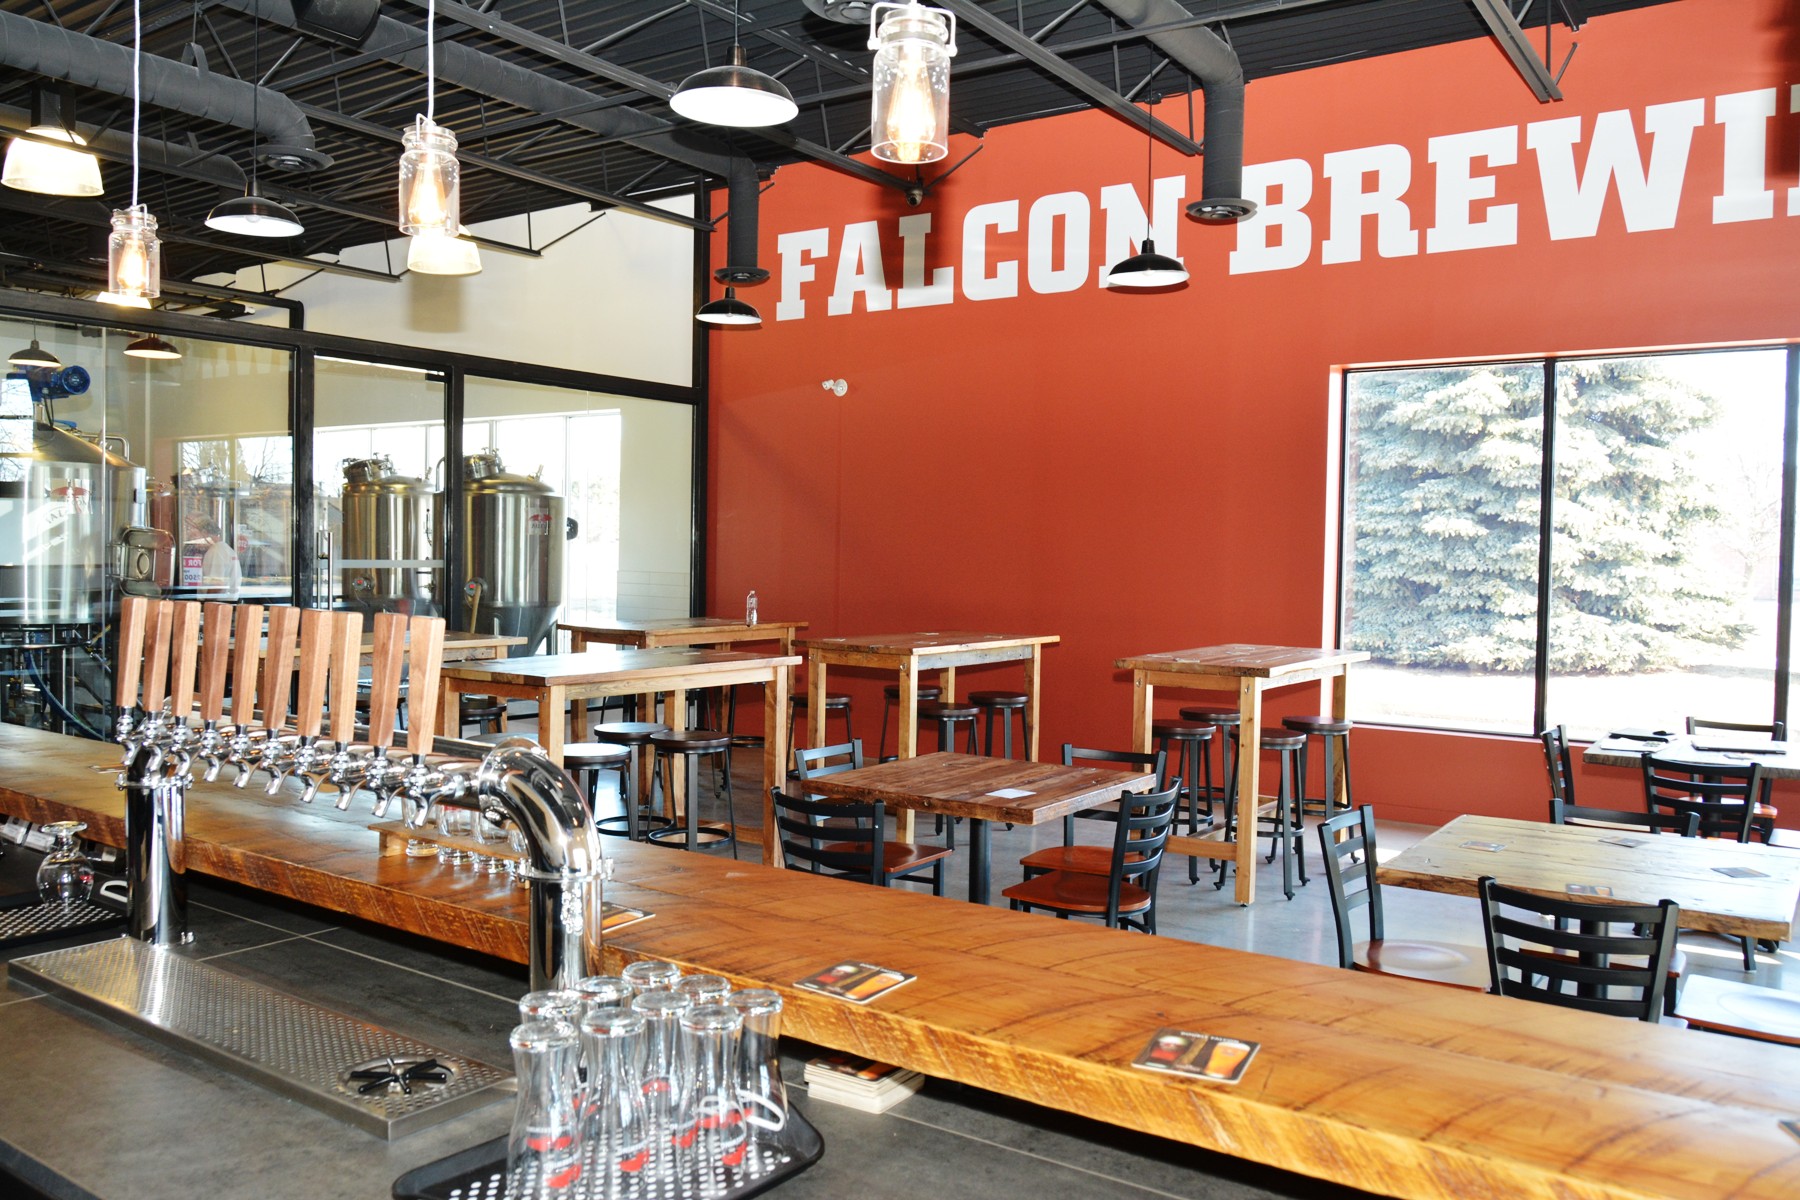 Interior of Falcon Brewery showing bar and tables